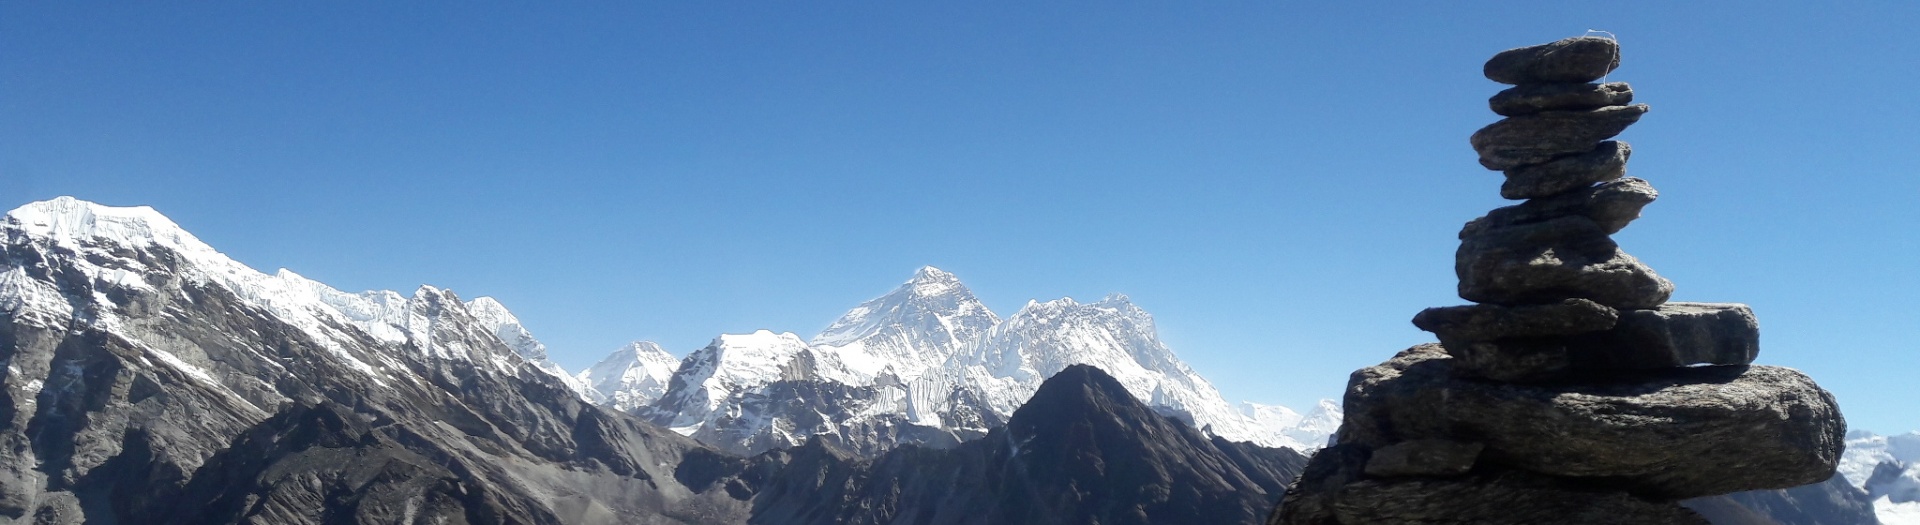 Everest, Objective : 5545 m